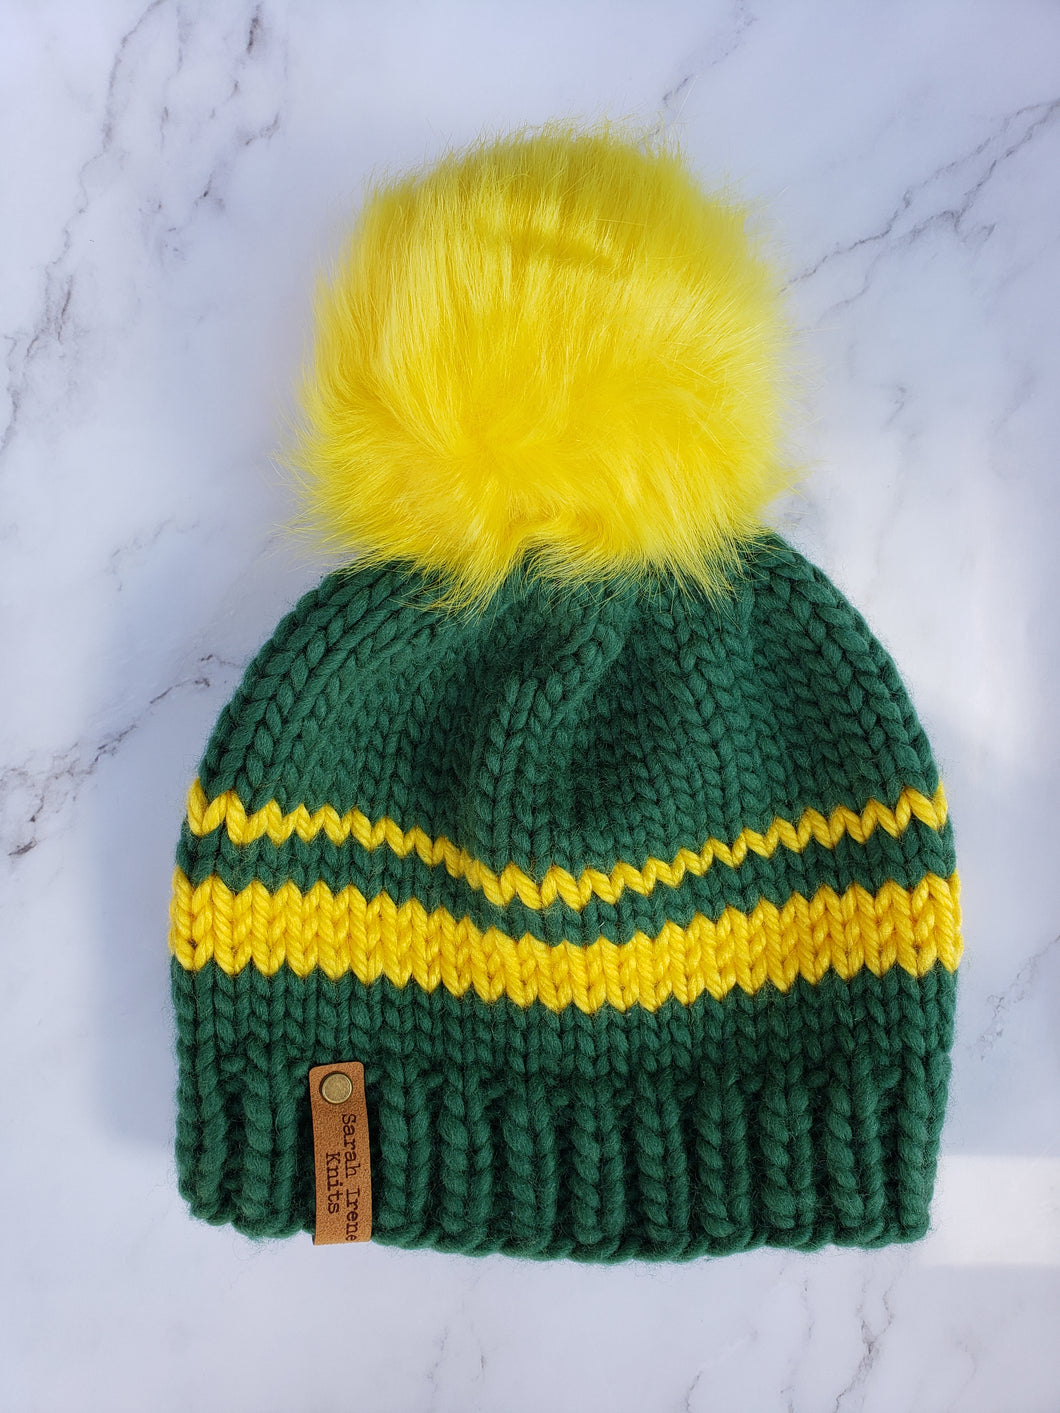 Classic Beanie - Sports Fan Green and Yellow with Lux Pom - Large